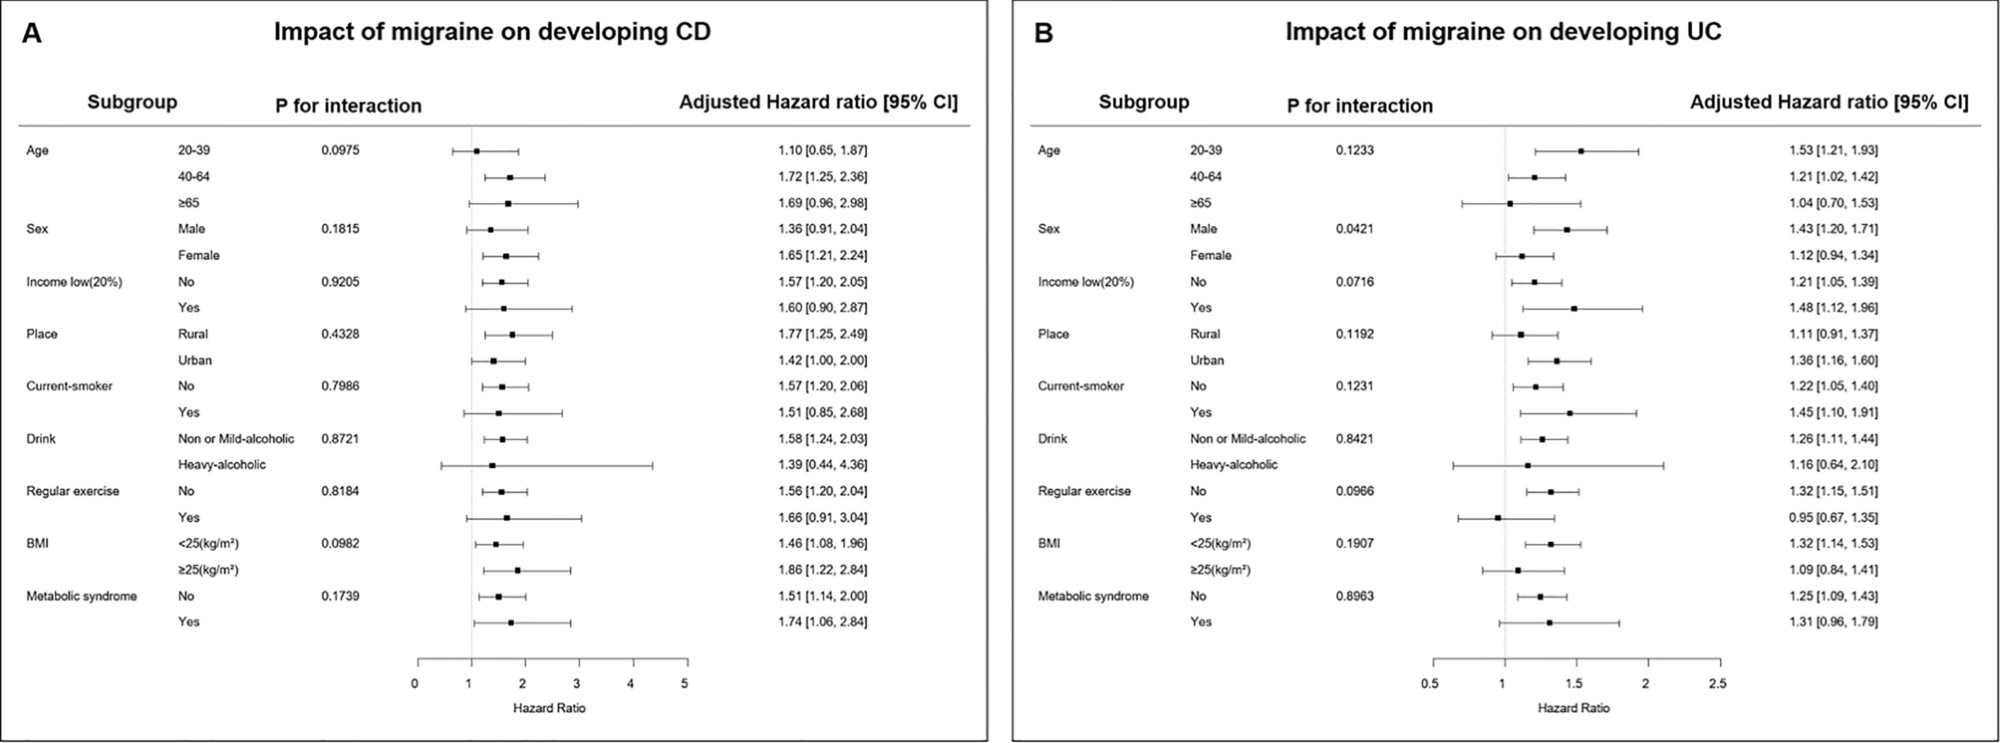 Subgroup analysis for the risk of (A) Crohn’s disease and (B) ulcerative colitis in patents with migraine compared to control groups.